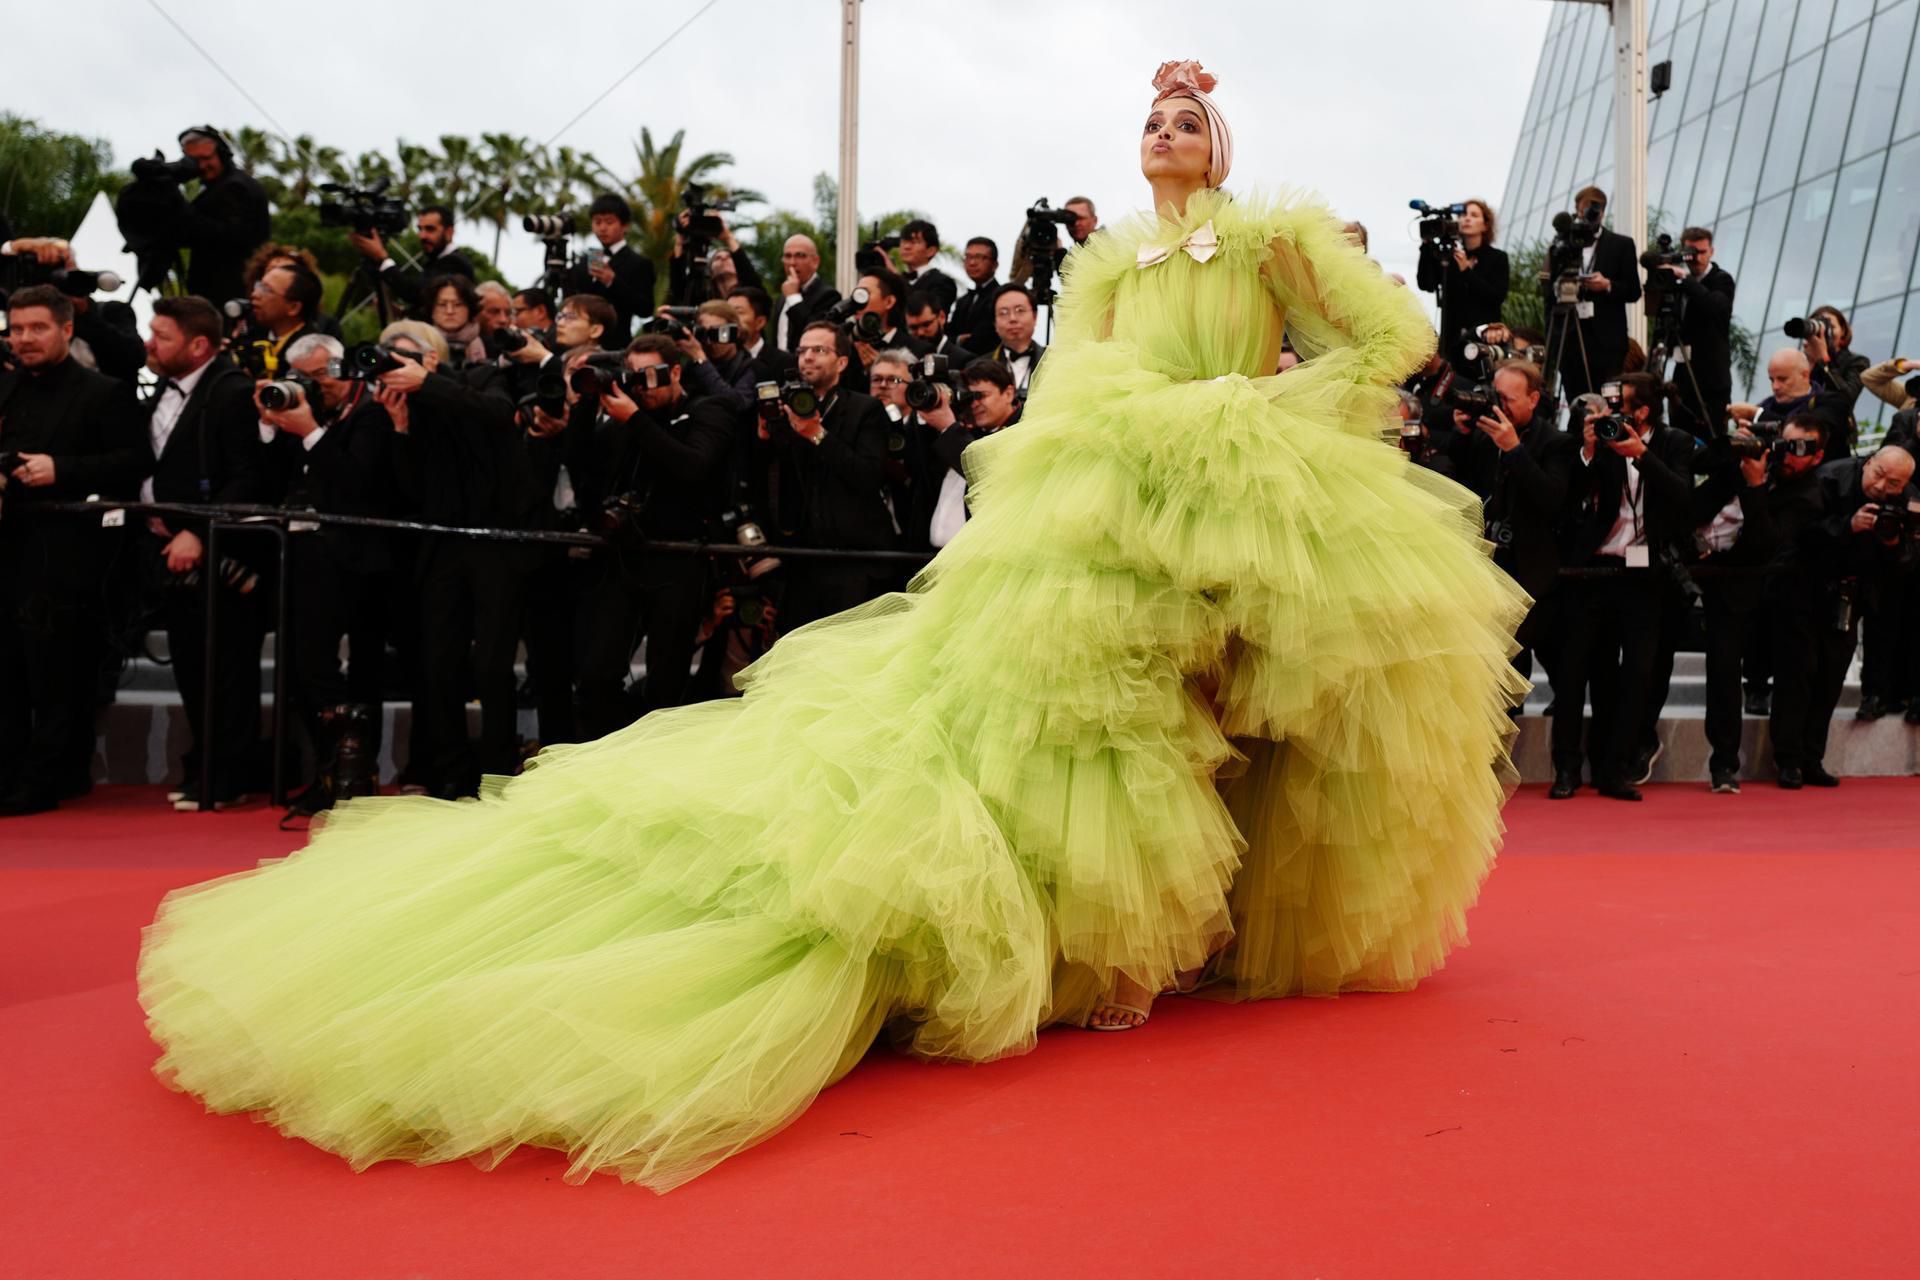 Deepika Padukone At Cannes 2022: Makes First Official Appearance